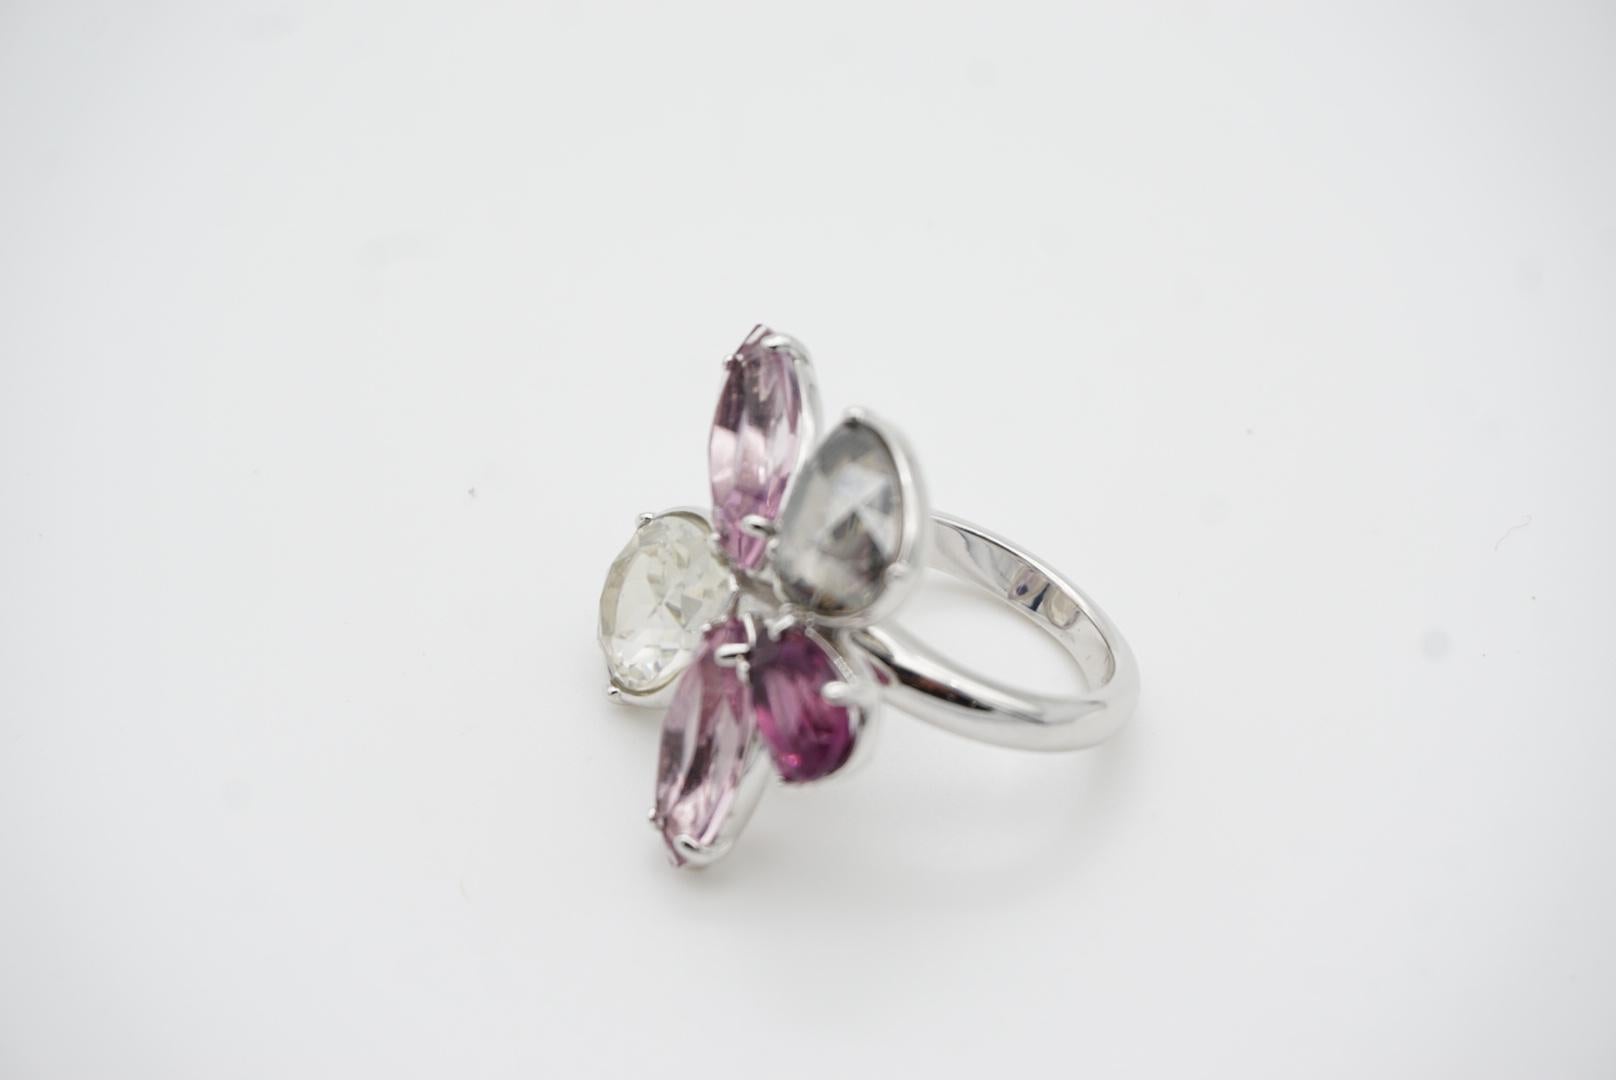 Swarovski Nirvana Cocktail Clear Purple Crystal Flower Ring, Silver, Size 55 For Sale 4